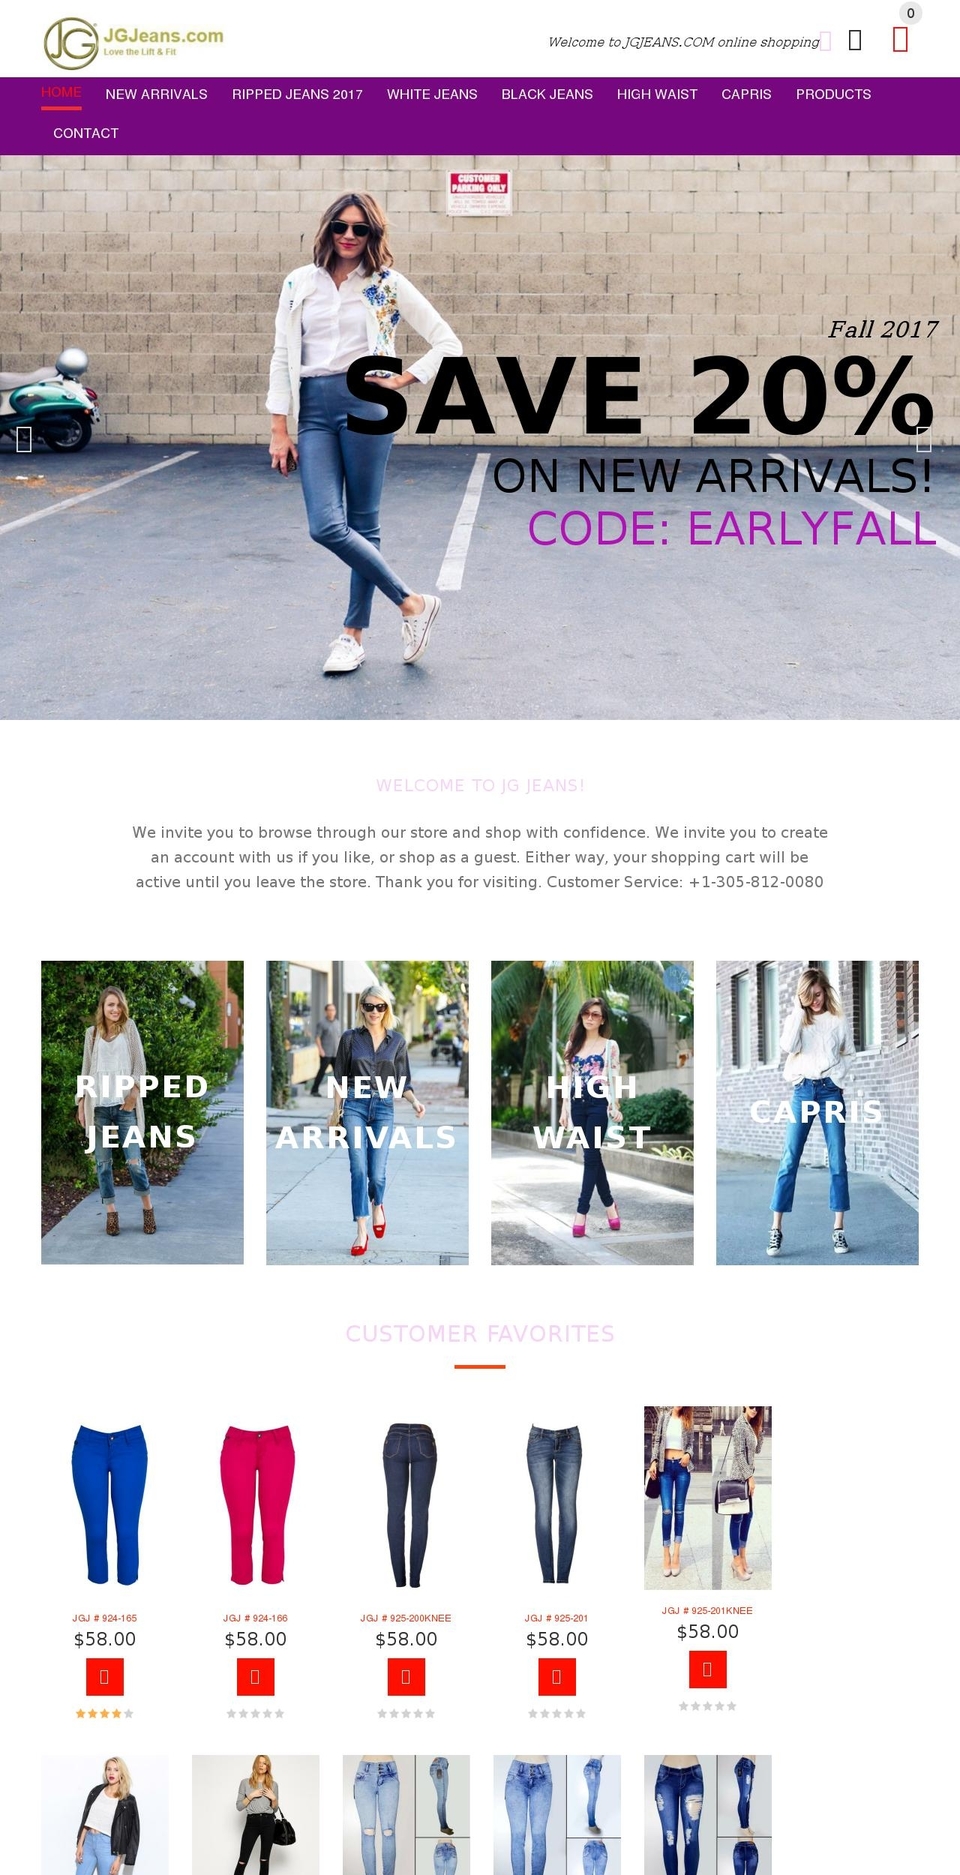 yourstore-v2-1-6 Shopify theme site example jeans101.com